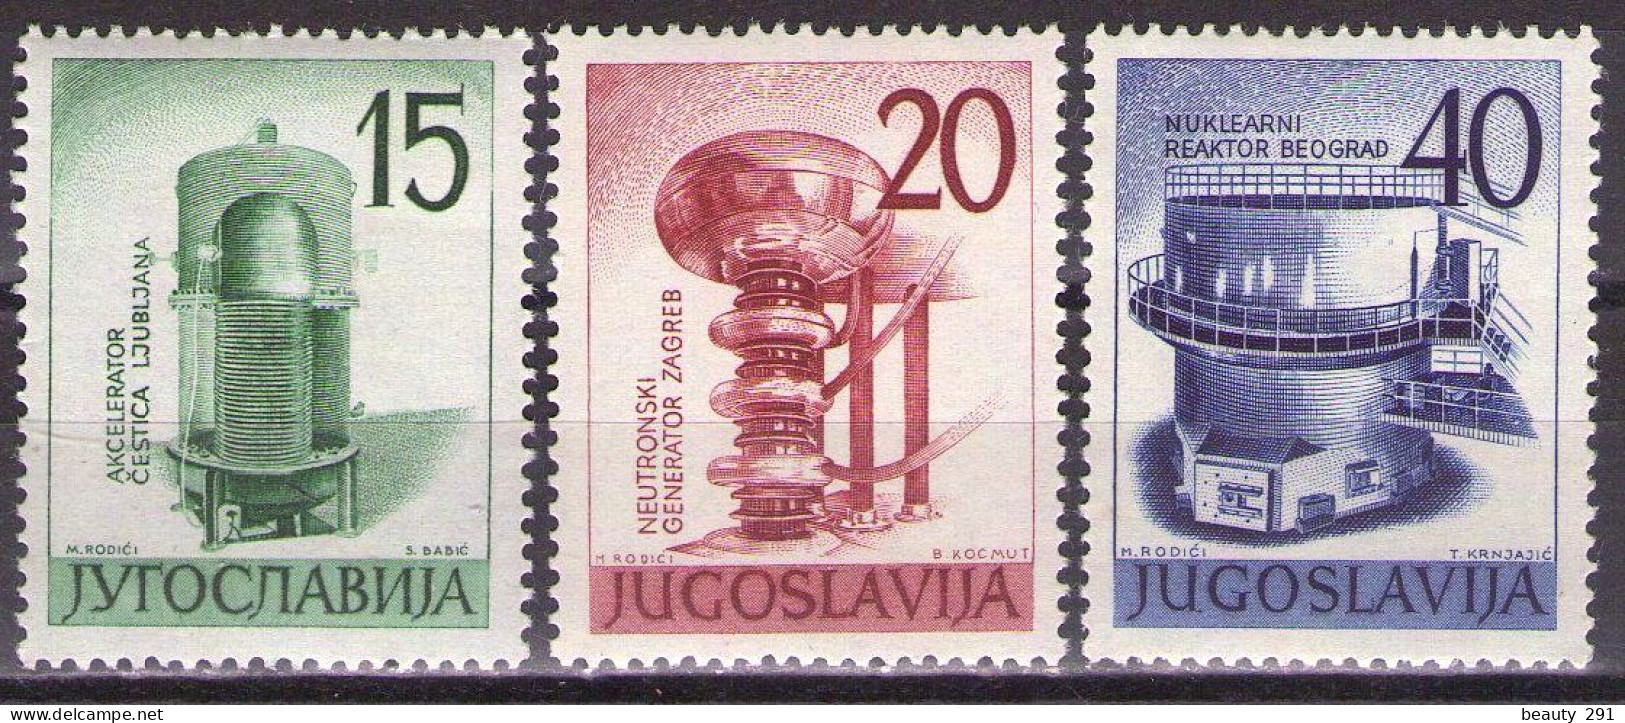 Yugoslavia 1960 - Nuclear Energy Exhibition - Mi 927-929 - MNH**VF - Unused Stamps